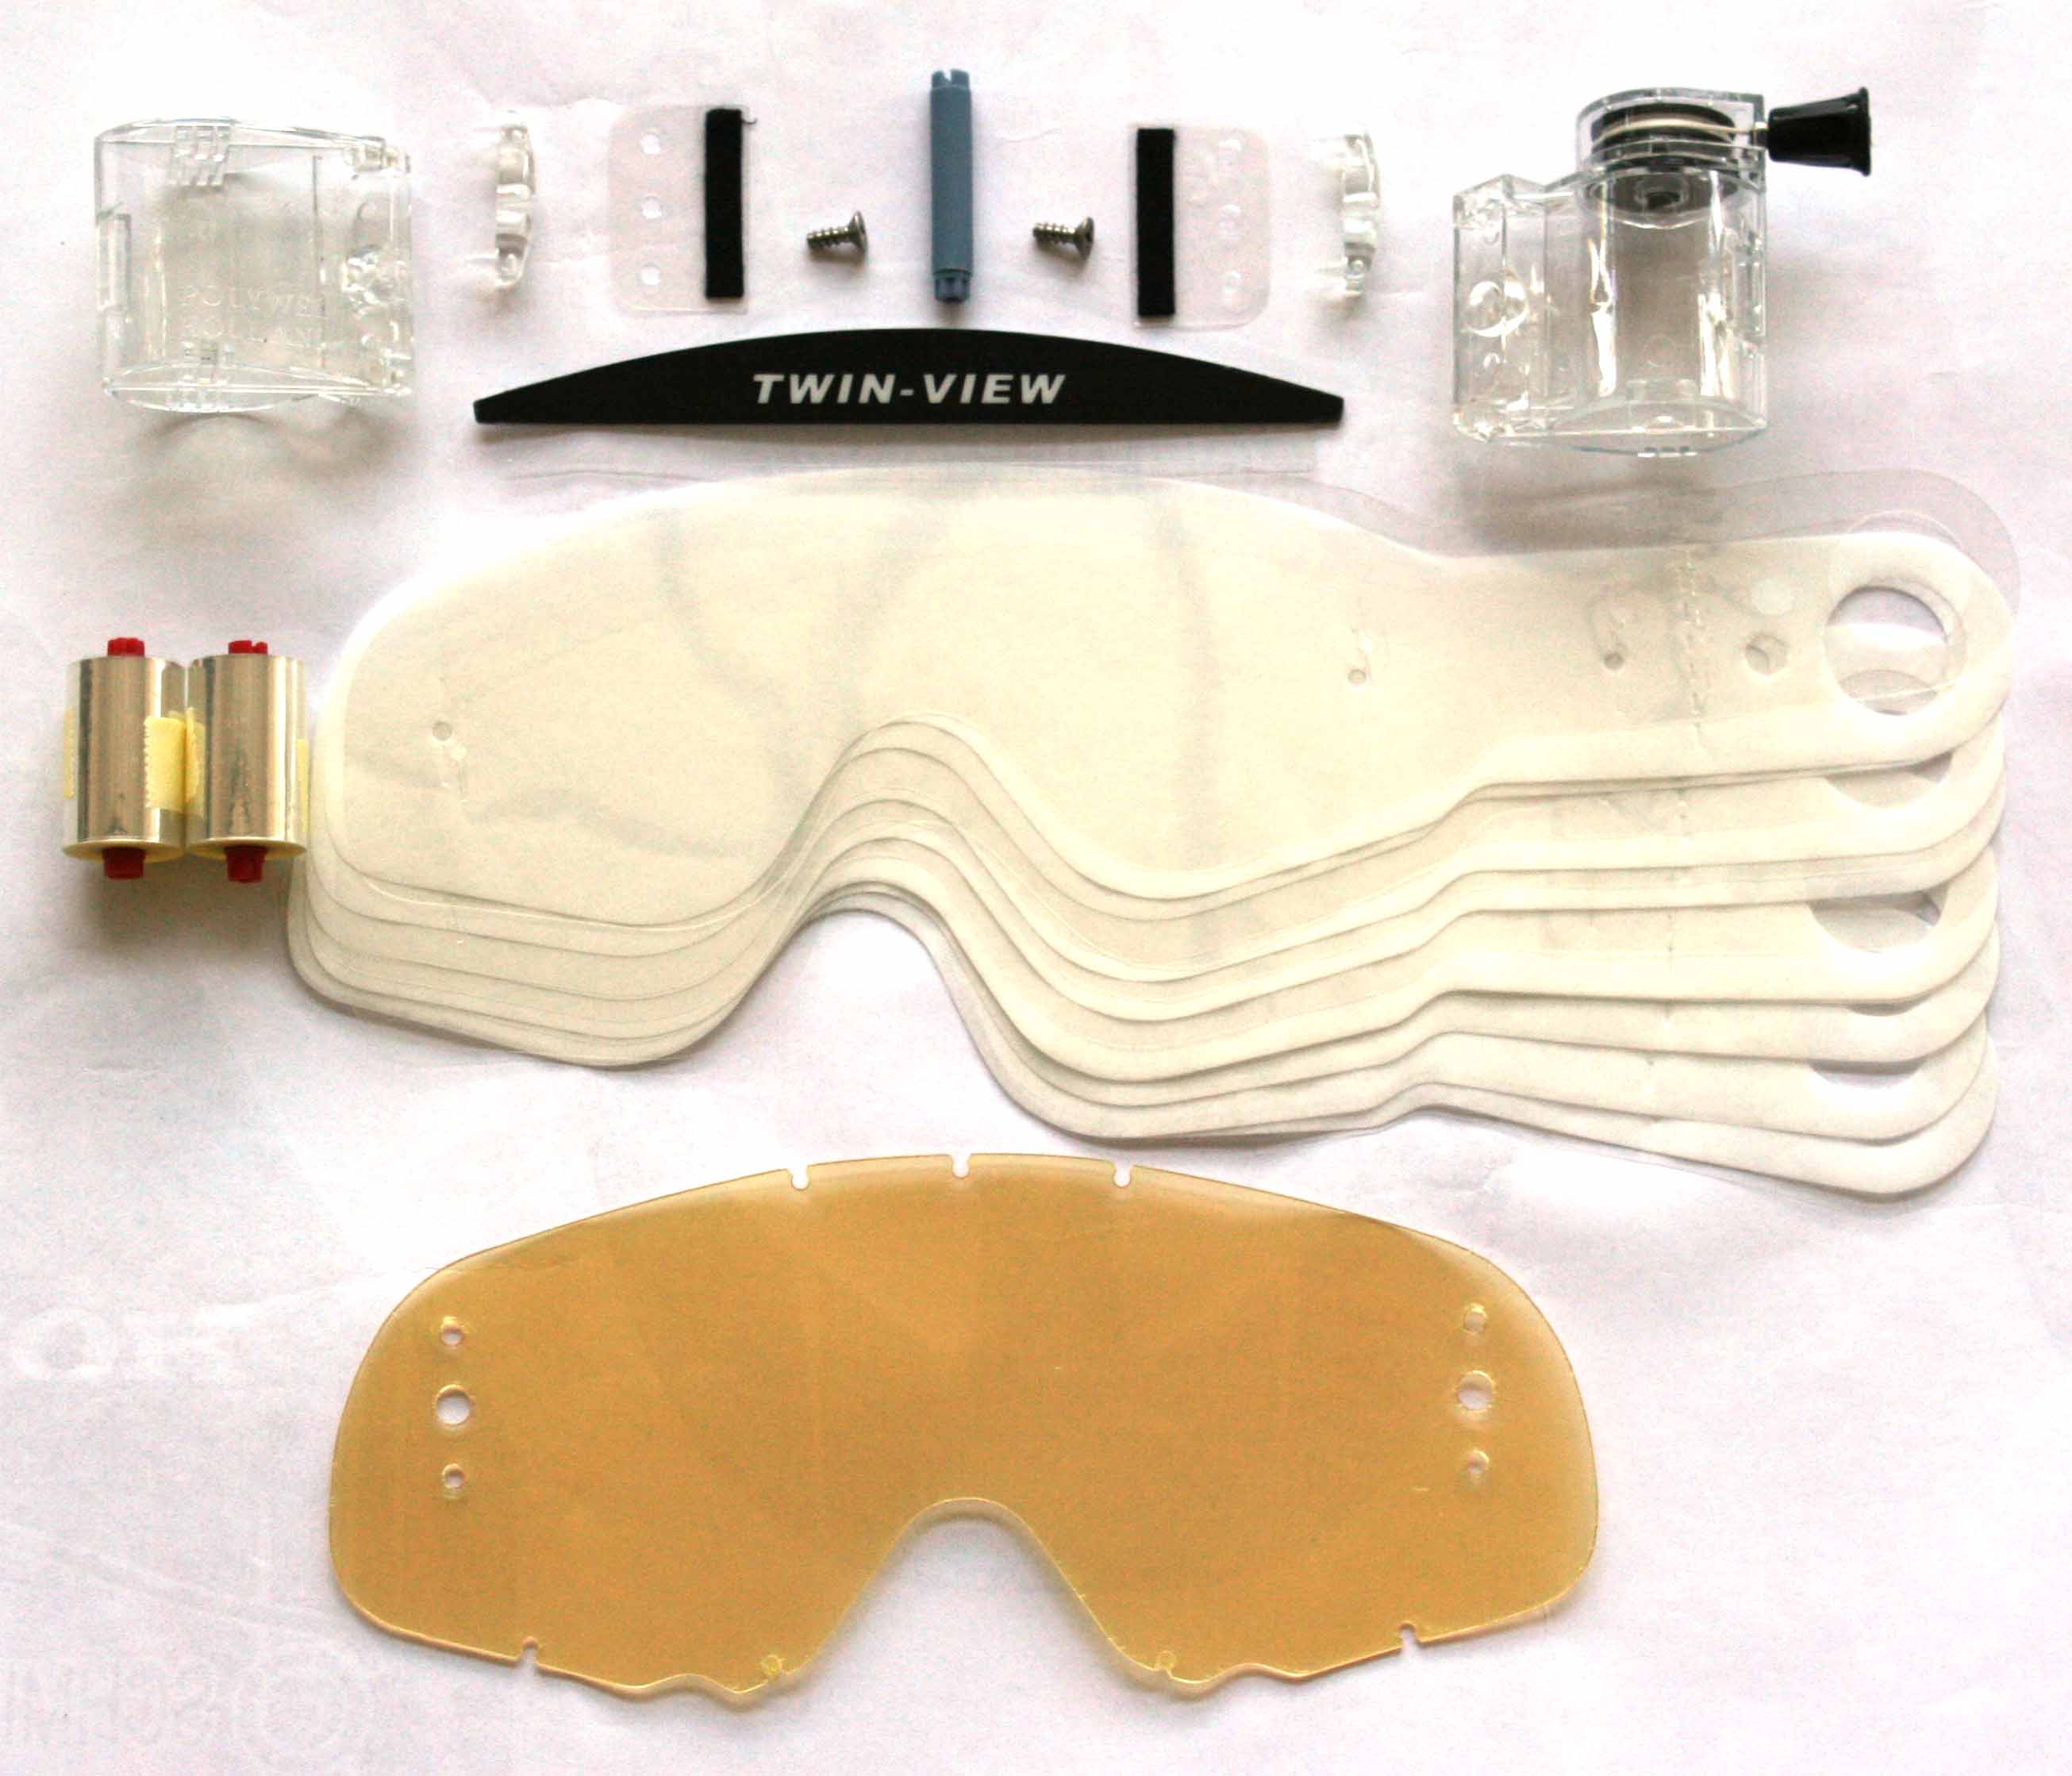 ROLL-OFF SYSTEM TWIN-VIEW 1 ROLL-OFF KIT + 2 NON-STICK FILMS + 10 TEAR-OFFS + 1 SUPER-GLASS + 1 R-O SPINDLE + 1 MUDFLAP, OAKLEY CROWBAR